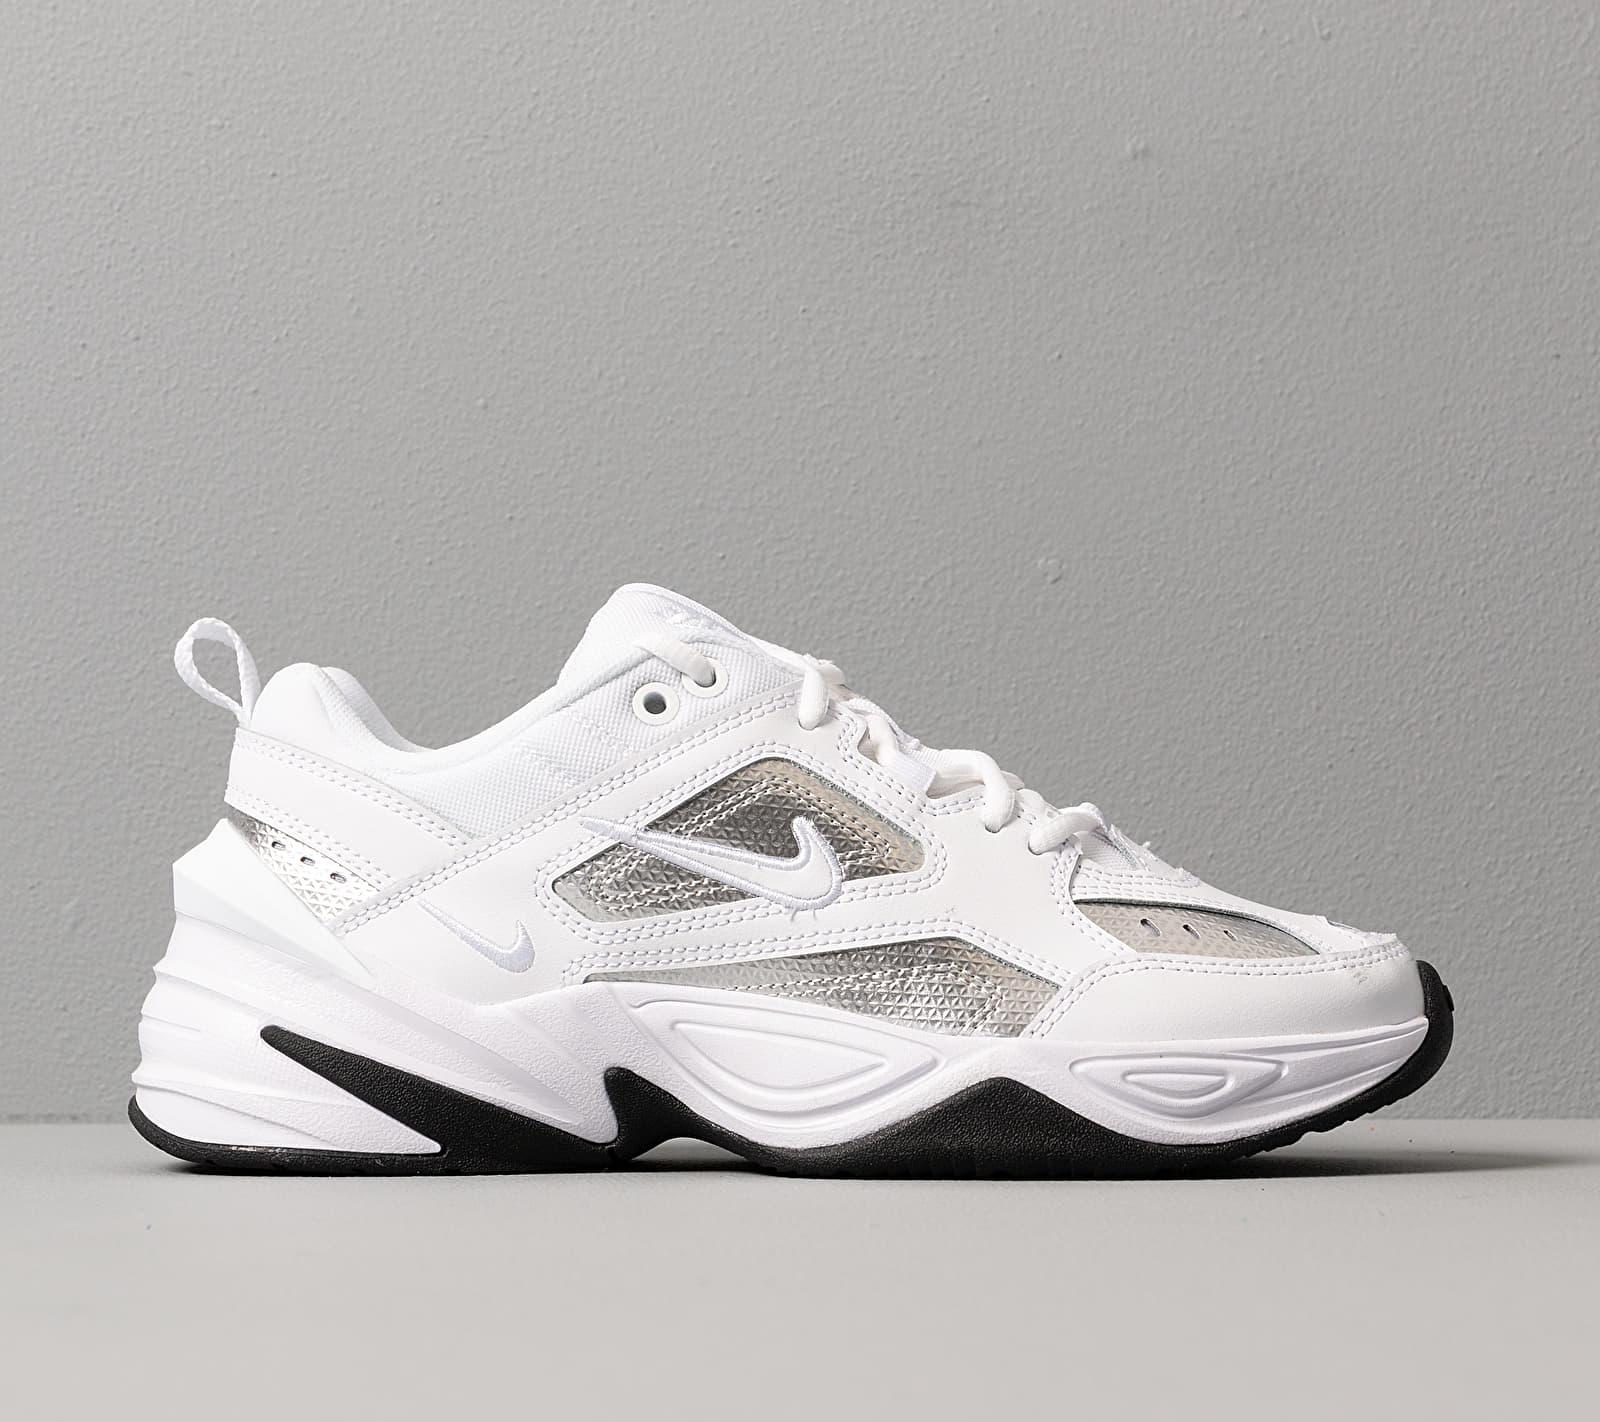 Nike White & Silver M2k Tekno Trainers | Lyst